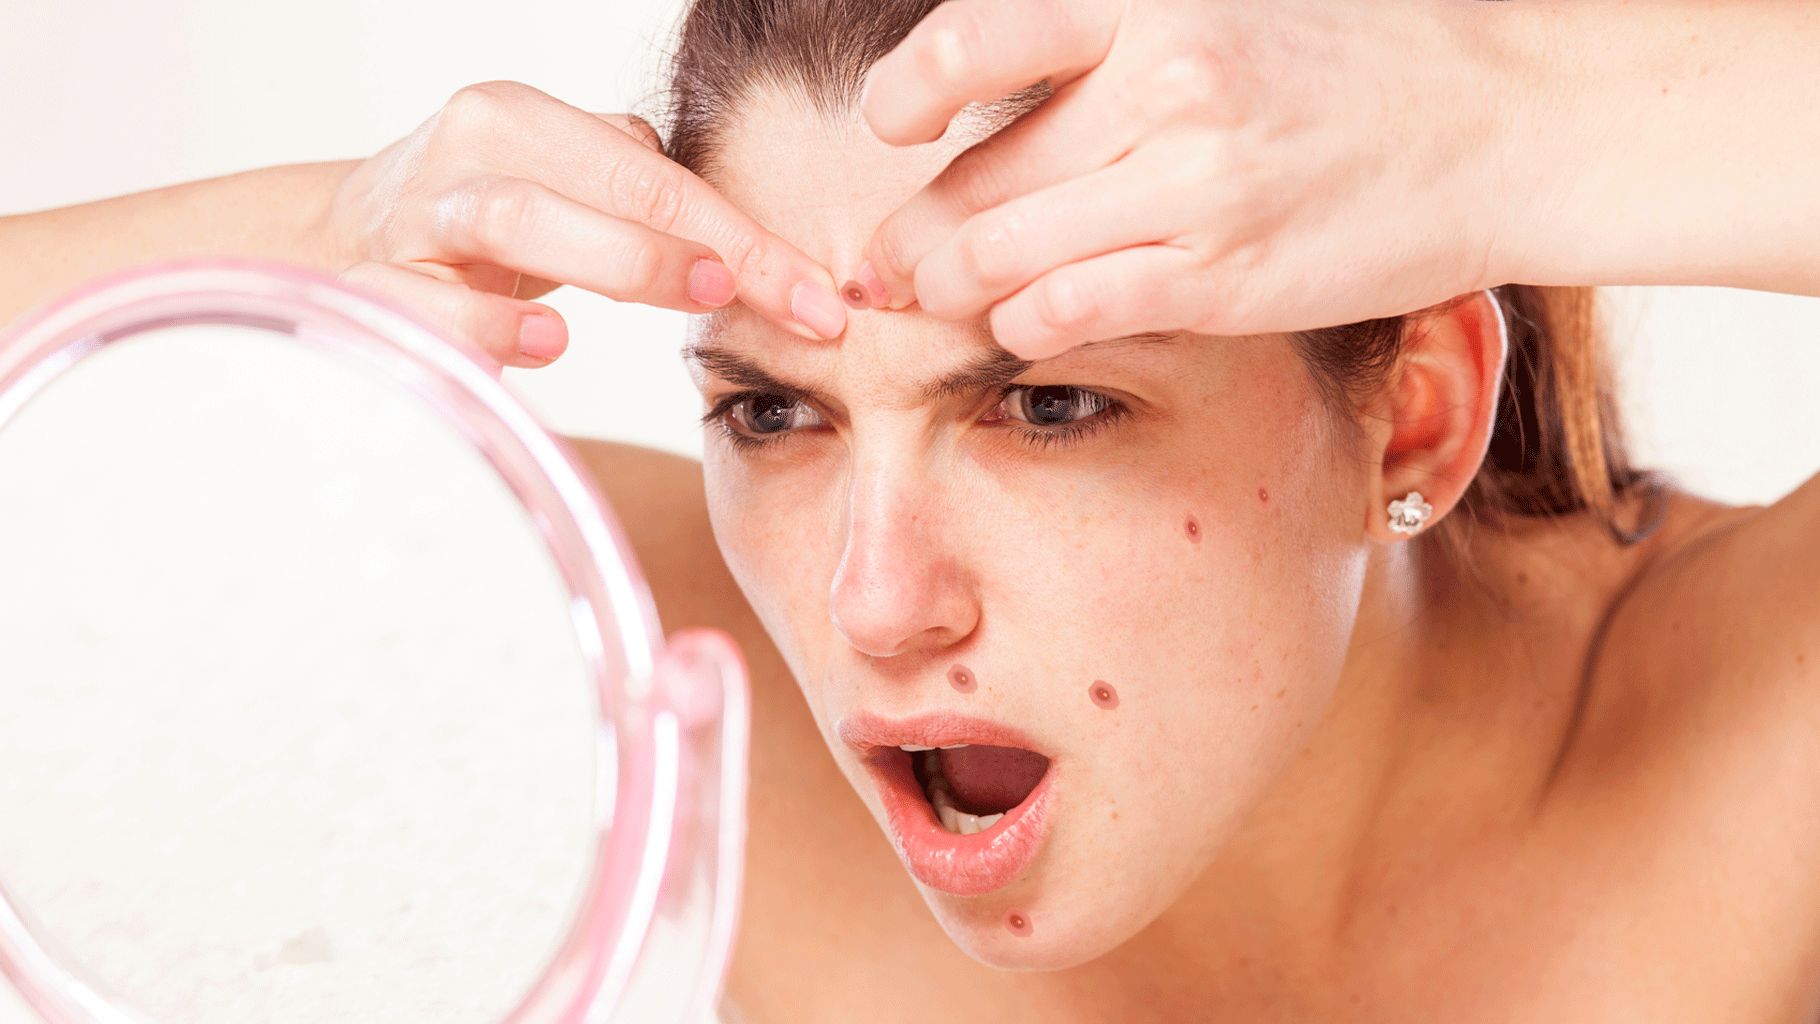 Medication for Severe Acne Alters Skin Microbiome: Study